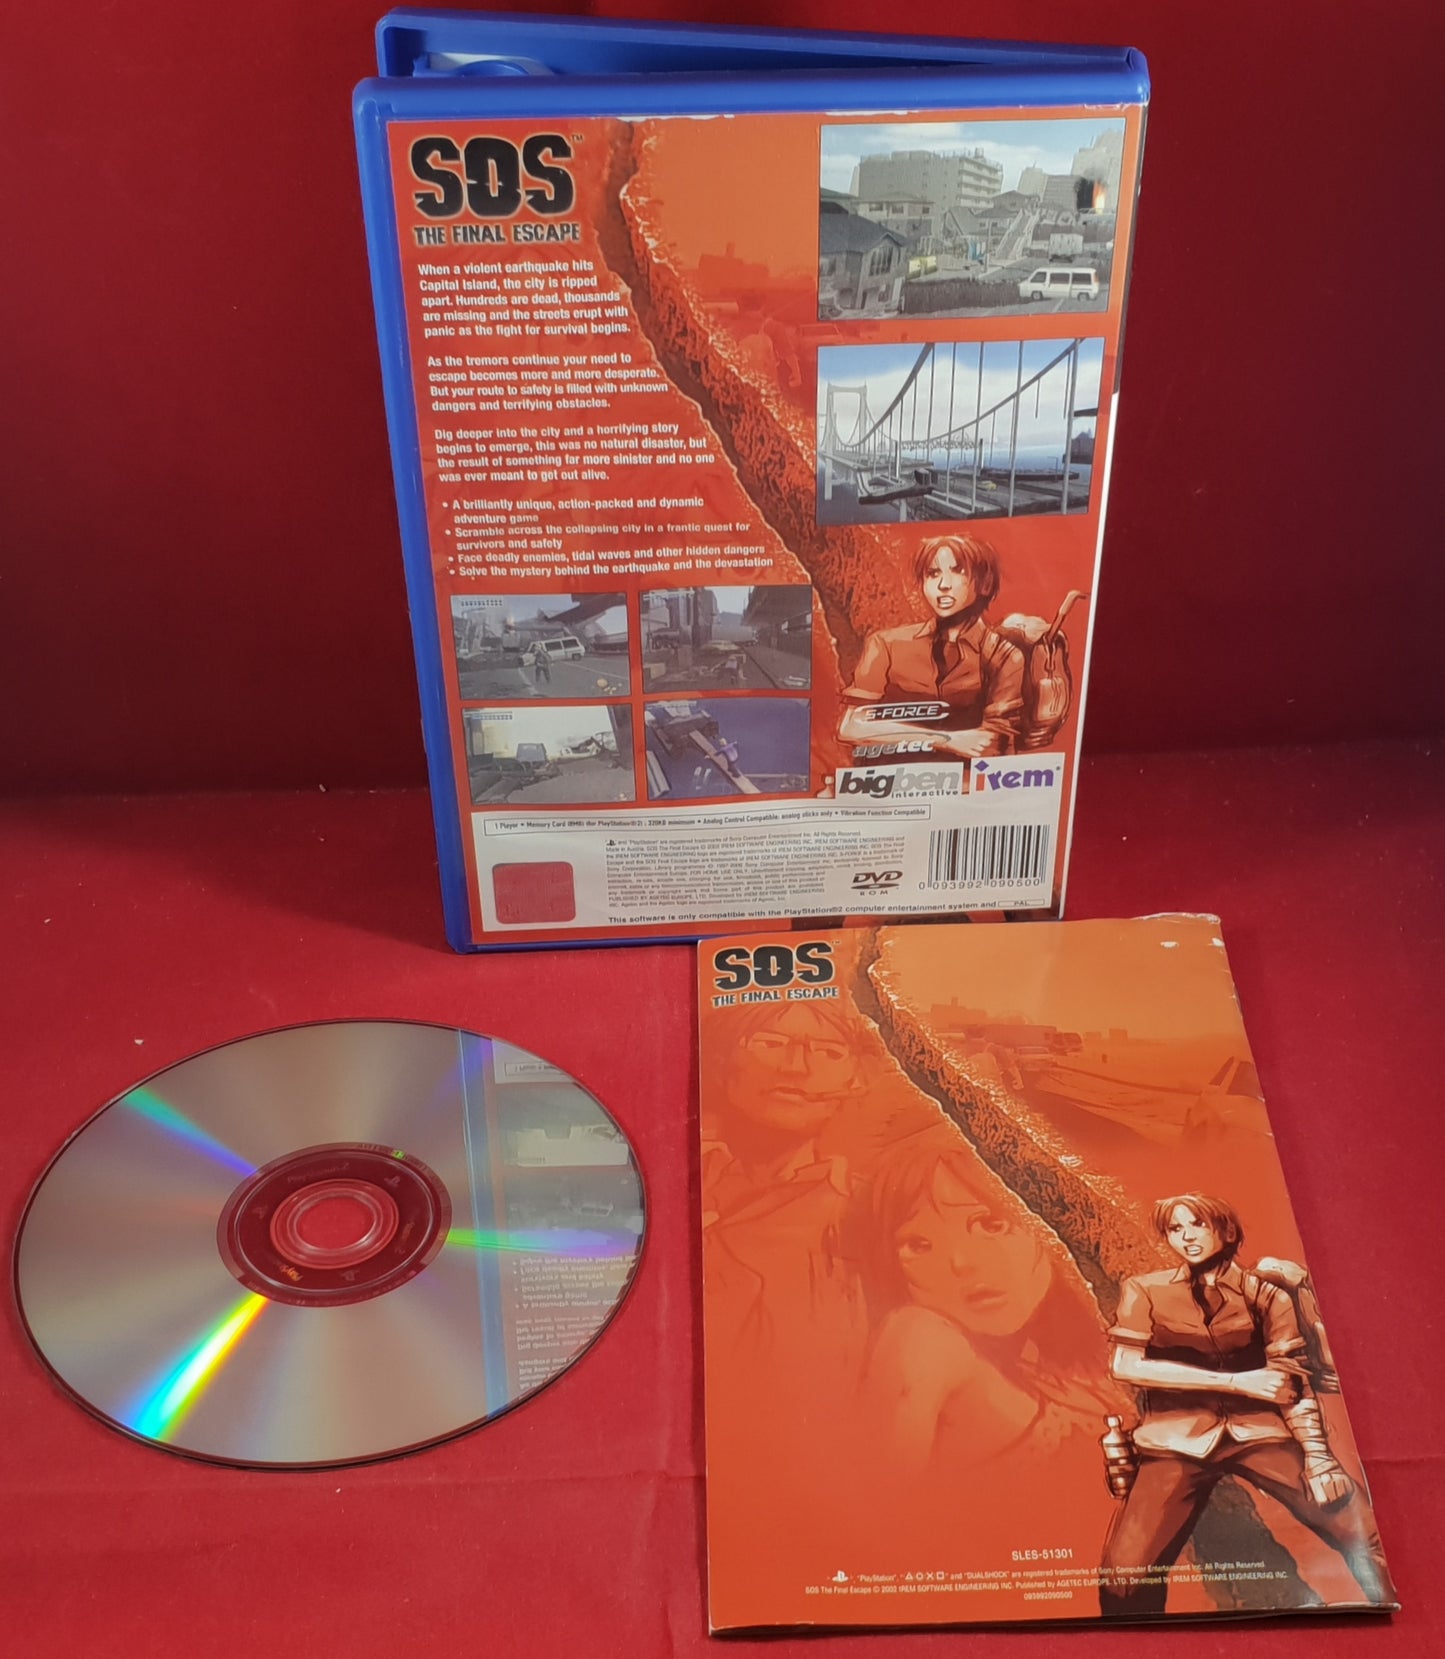 SOS the Final Escape Sony Playstaton 2 (PS2) Game